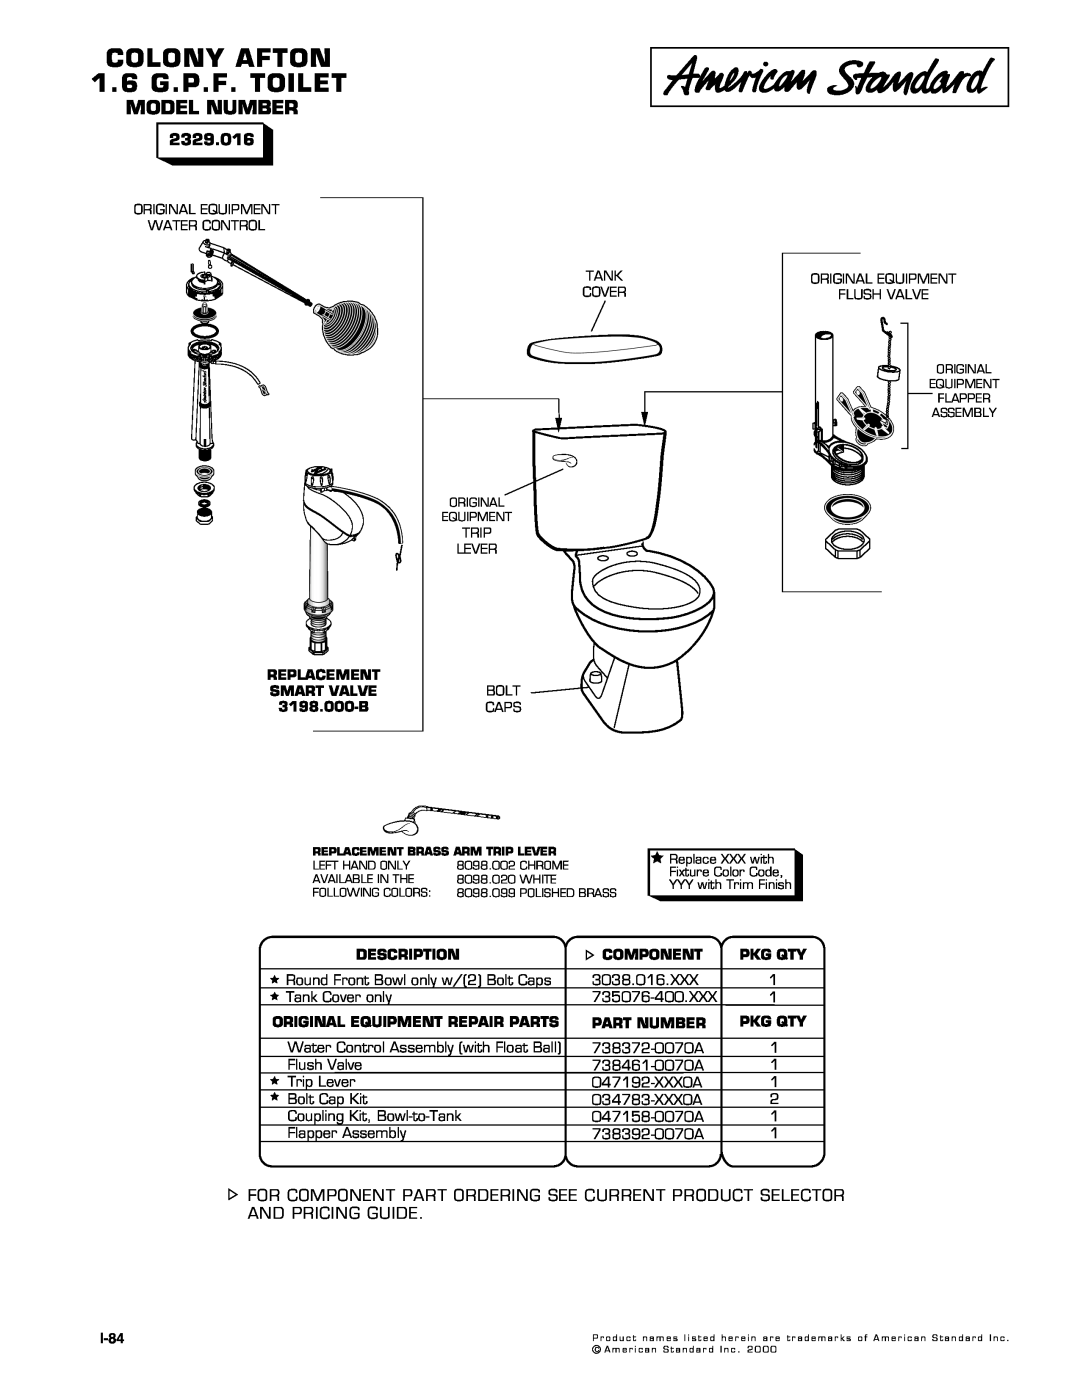 American Standard 2329.016 manual COLONY AFTON 1.6 G.P.F. TOILET, Model Number, REPLACEMENT SMART VALVE 3198.000-B, I-84 